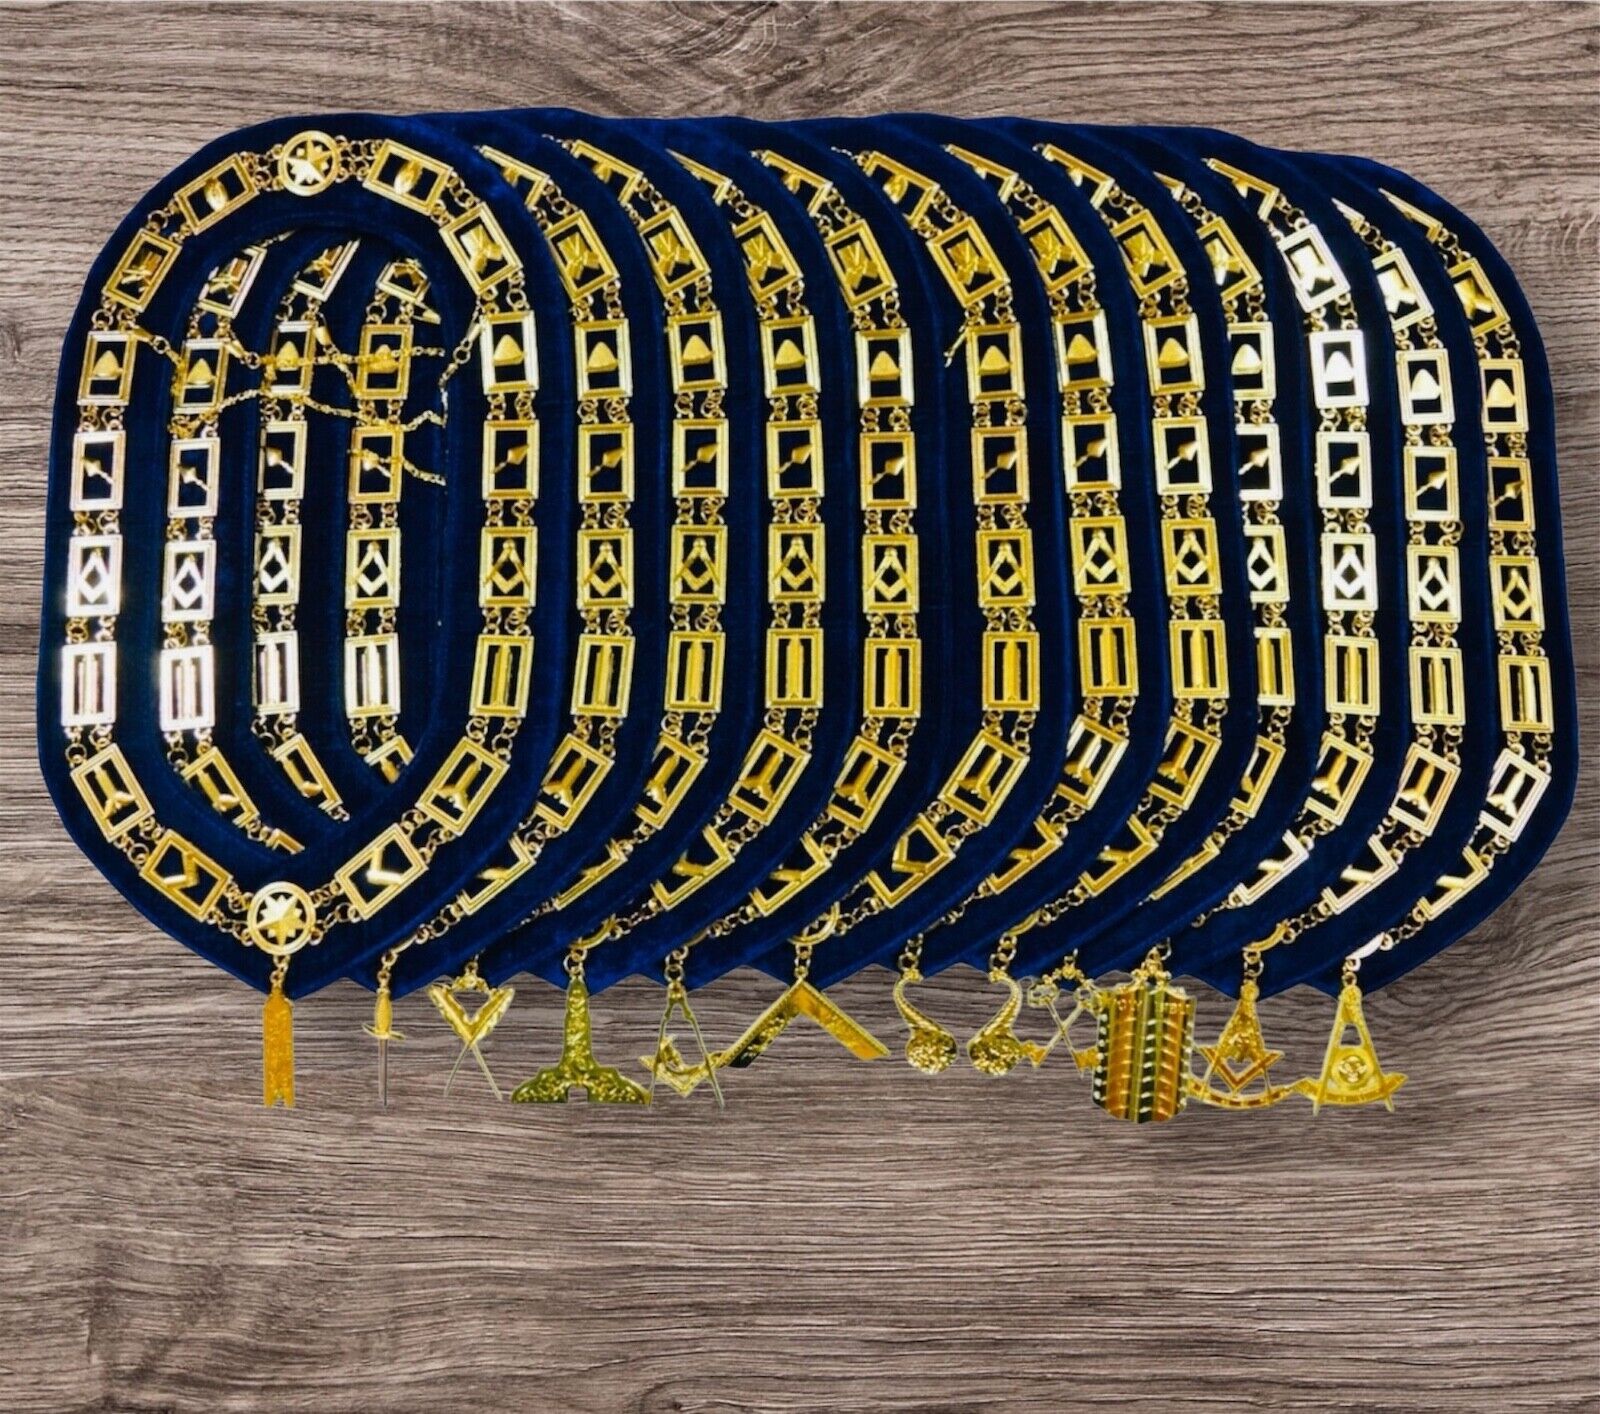 BLUE LODGE MASONIC Regalia CHAIN COLLAR WITH OFFICER GOLDEN JEWELS SET of 12